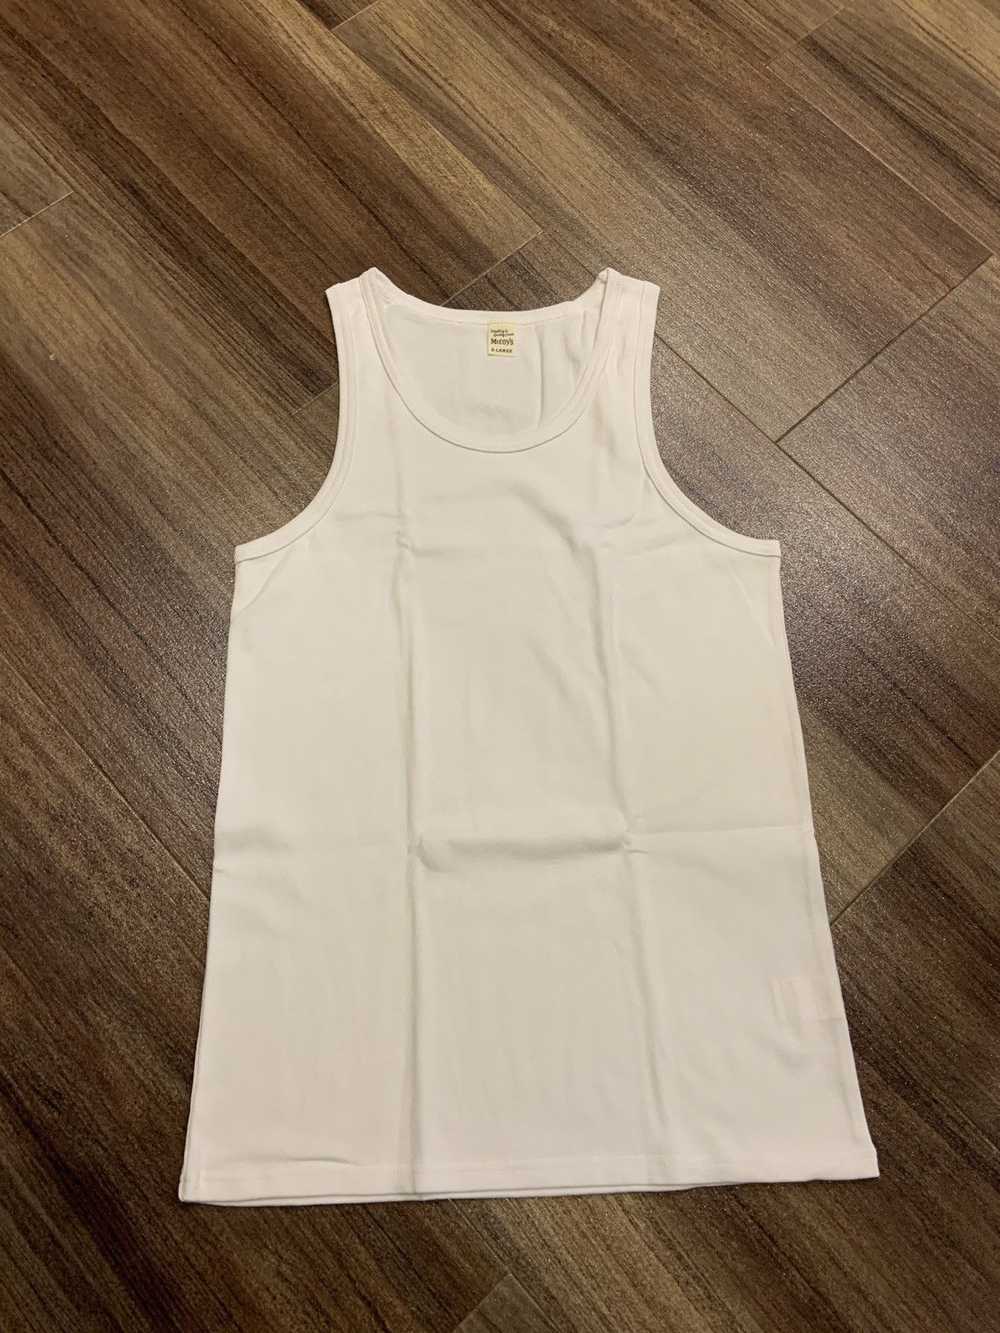 The Real McCoy's Real McCoy’s Tank Top - image 1